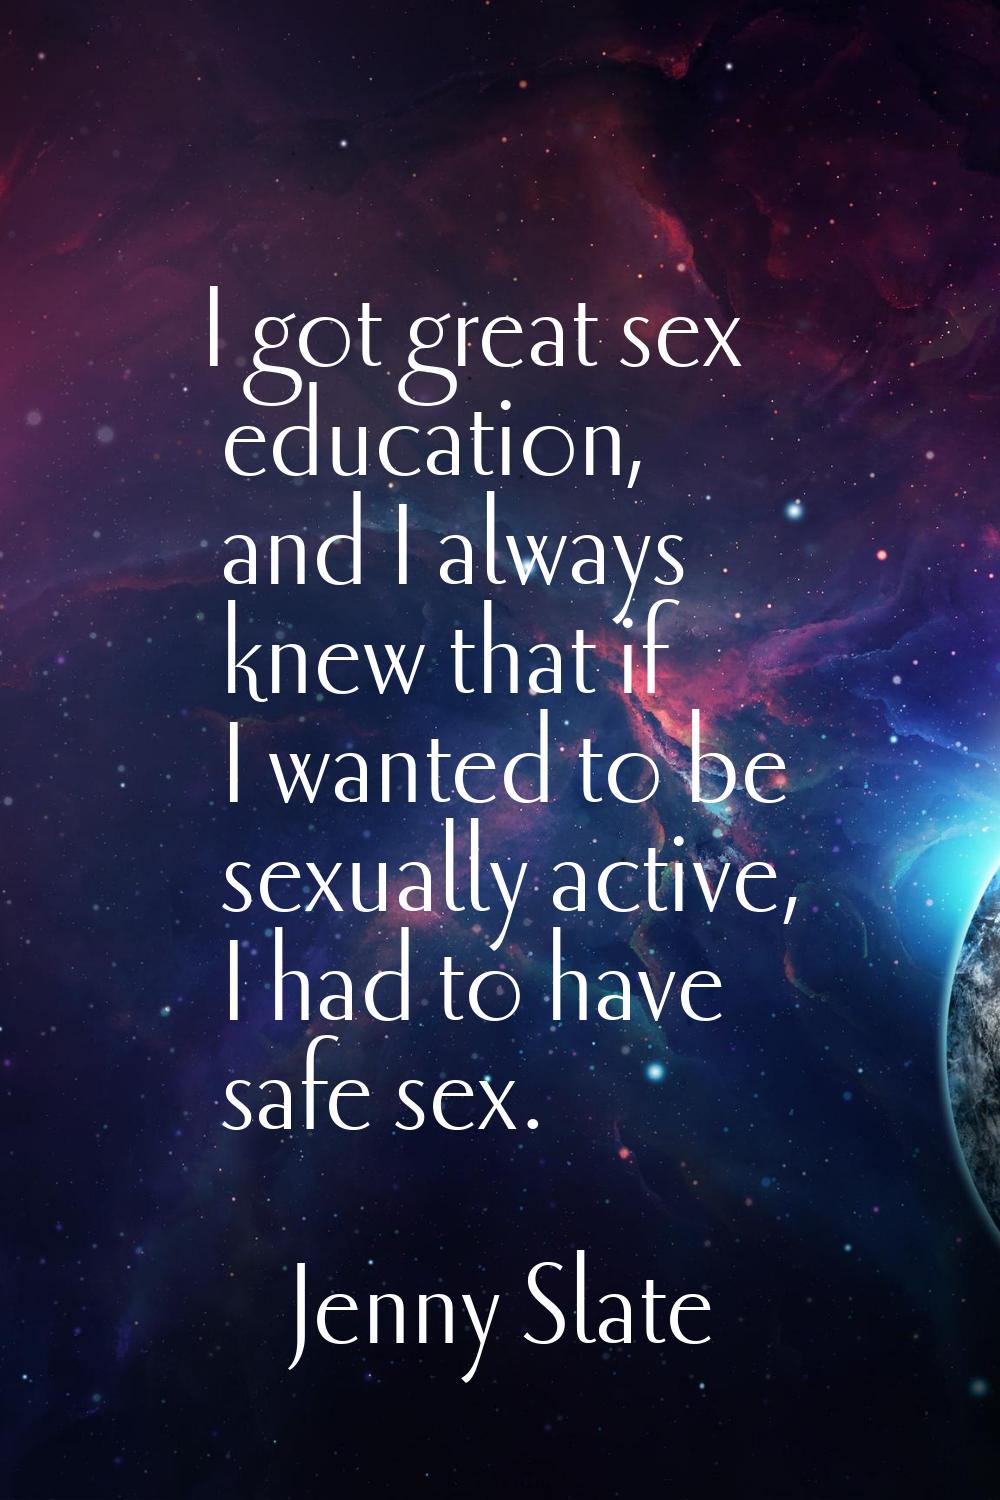 I got great sex education, and I always knew that if I wanted to be sexually active, I had to have 